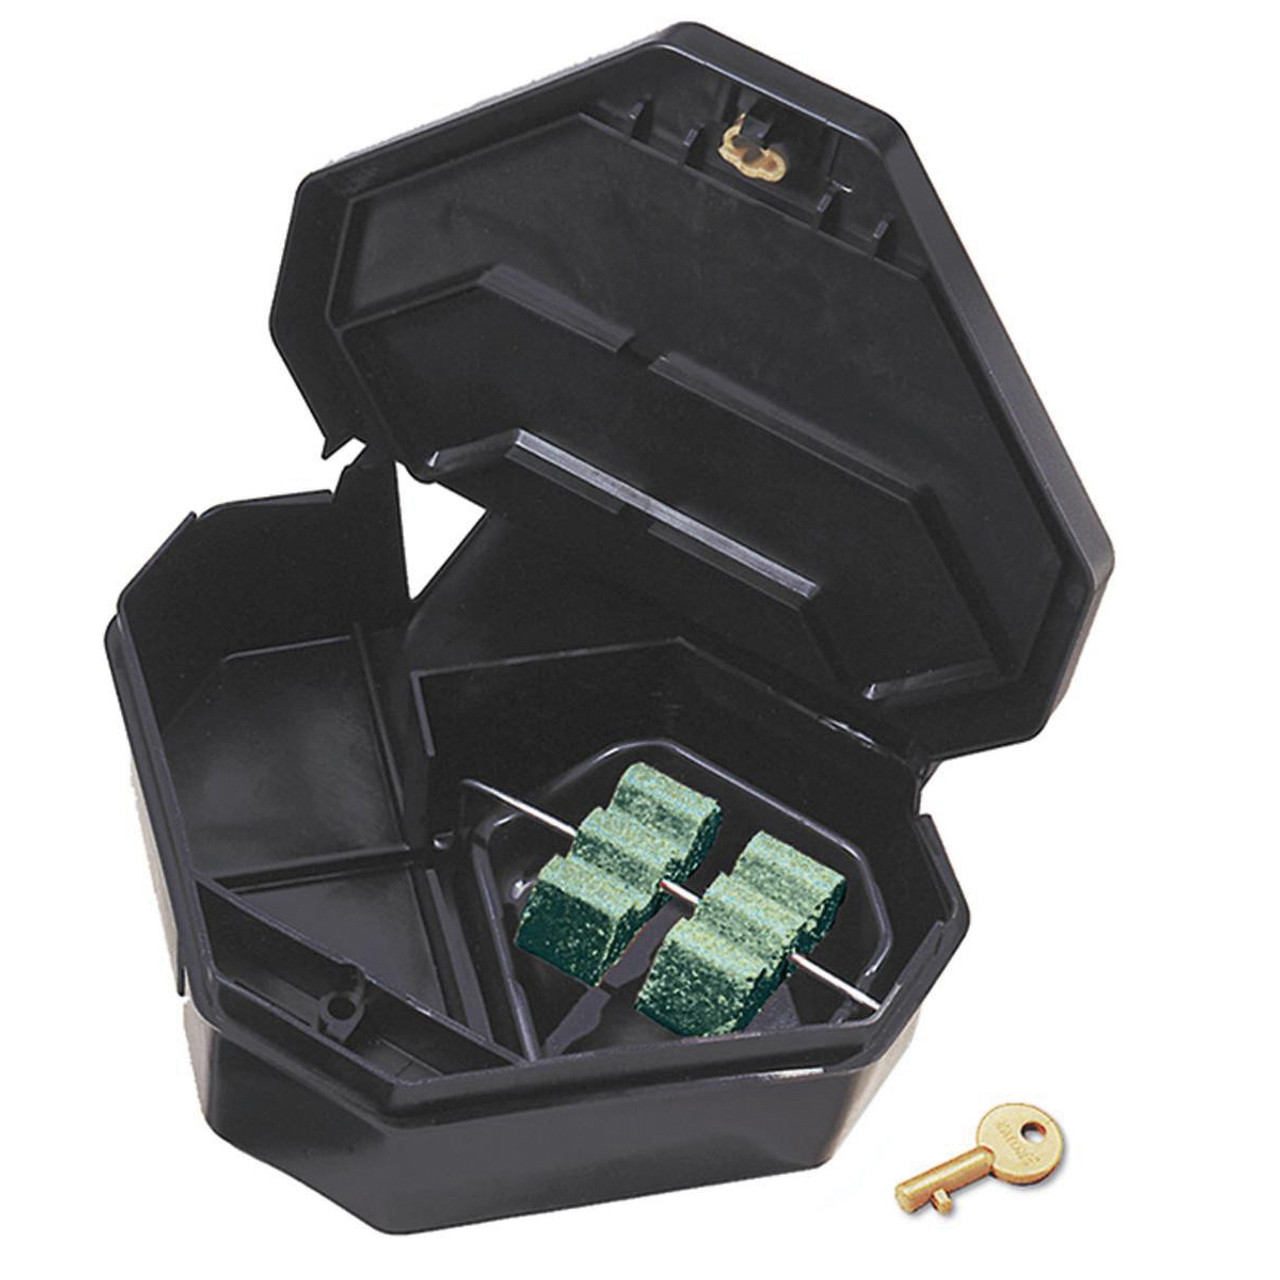 Mastertrap Lockable Mouse Bait Station Box with Key